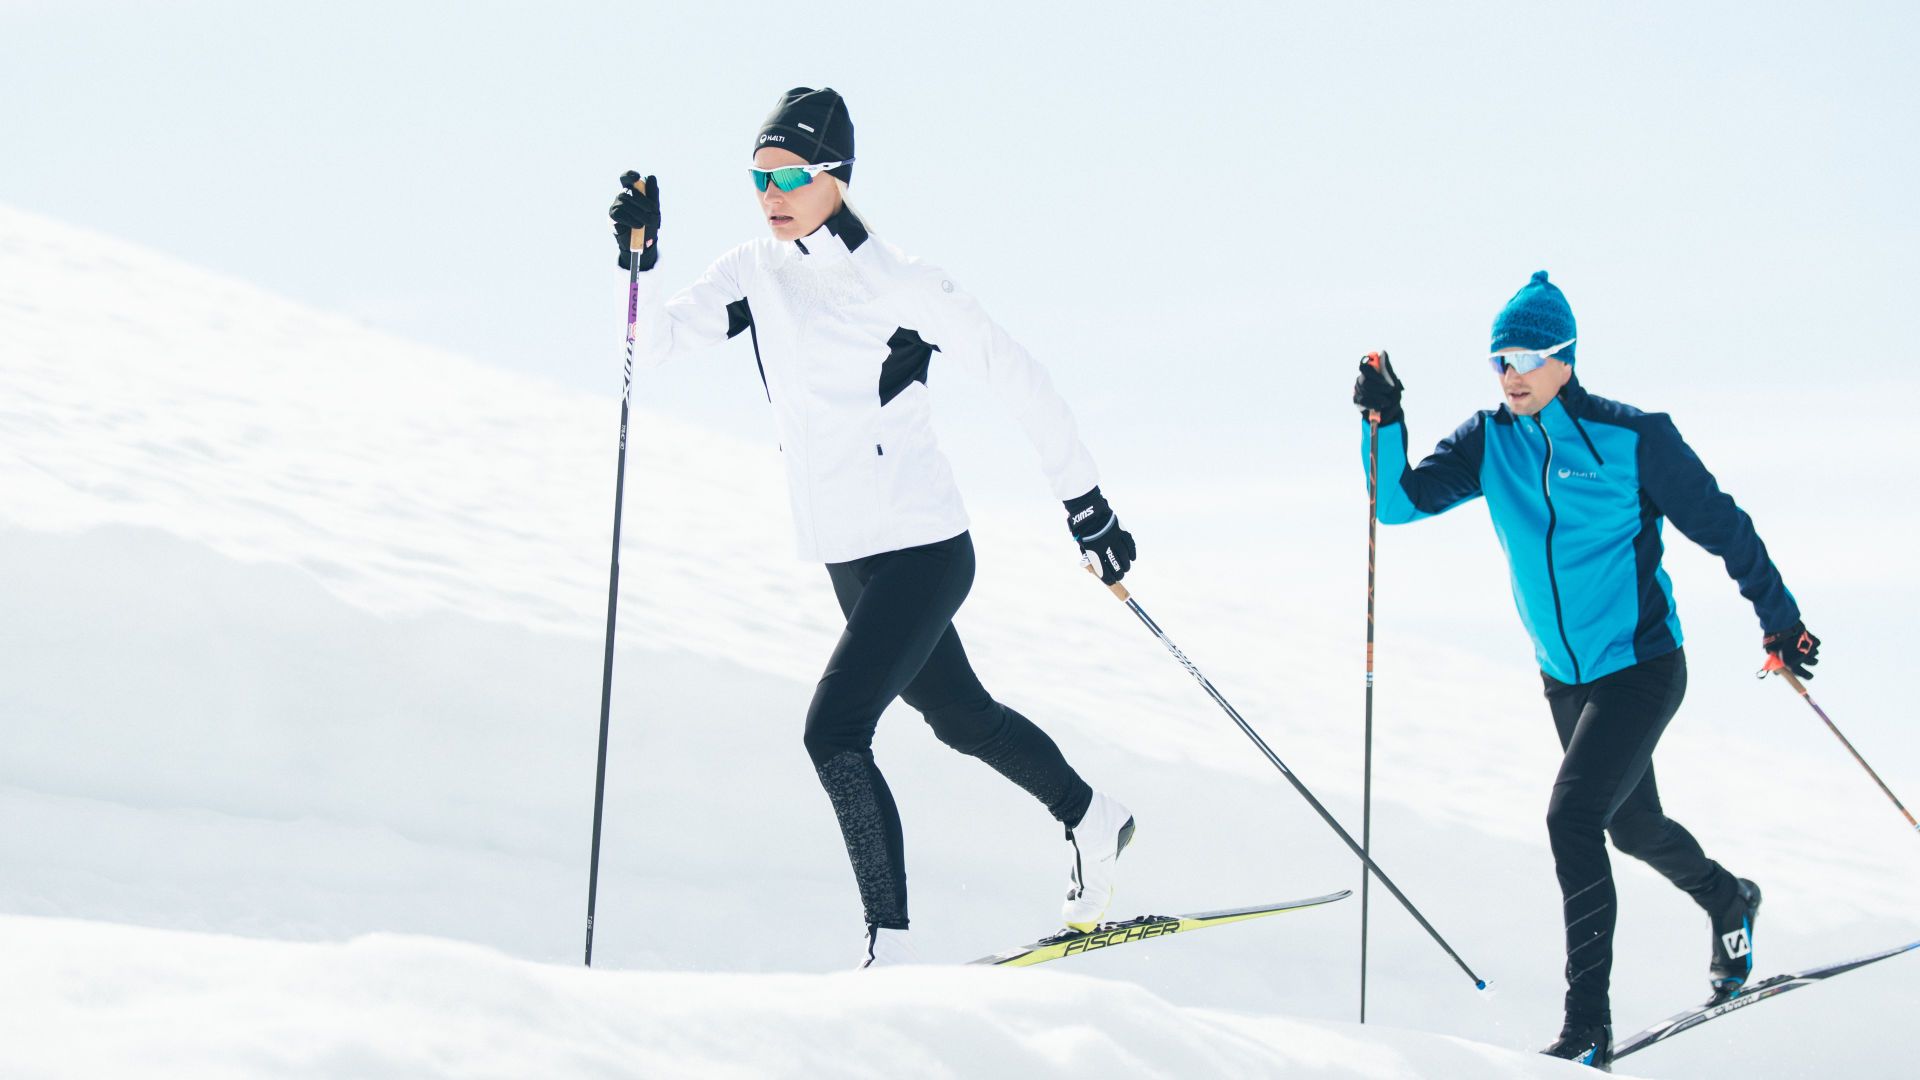 Skiers have lower incidence of depression